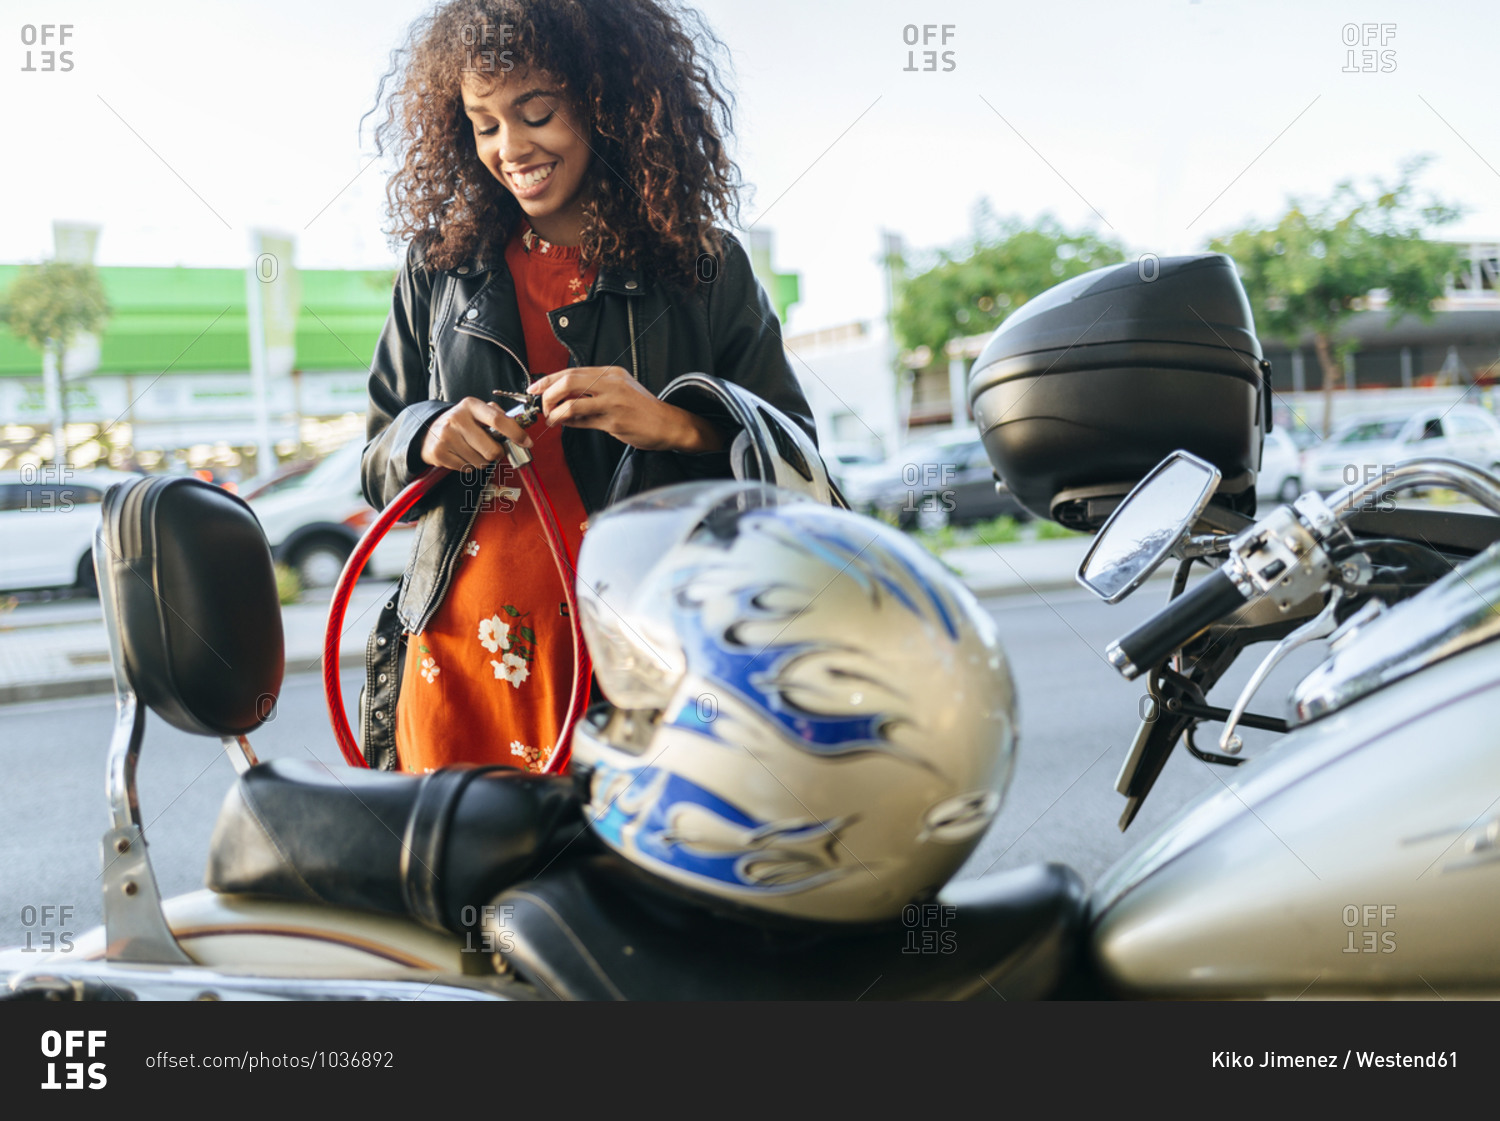 Smiling young woman removing safety lock from her motorcycle